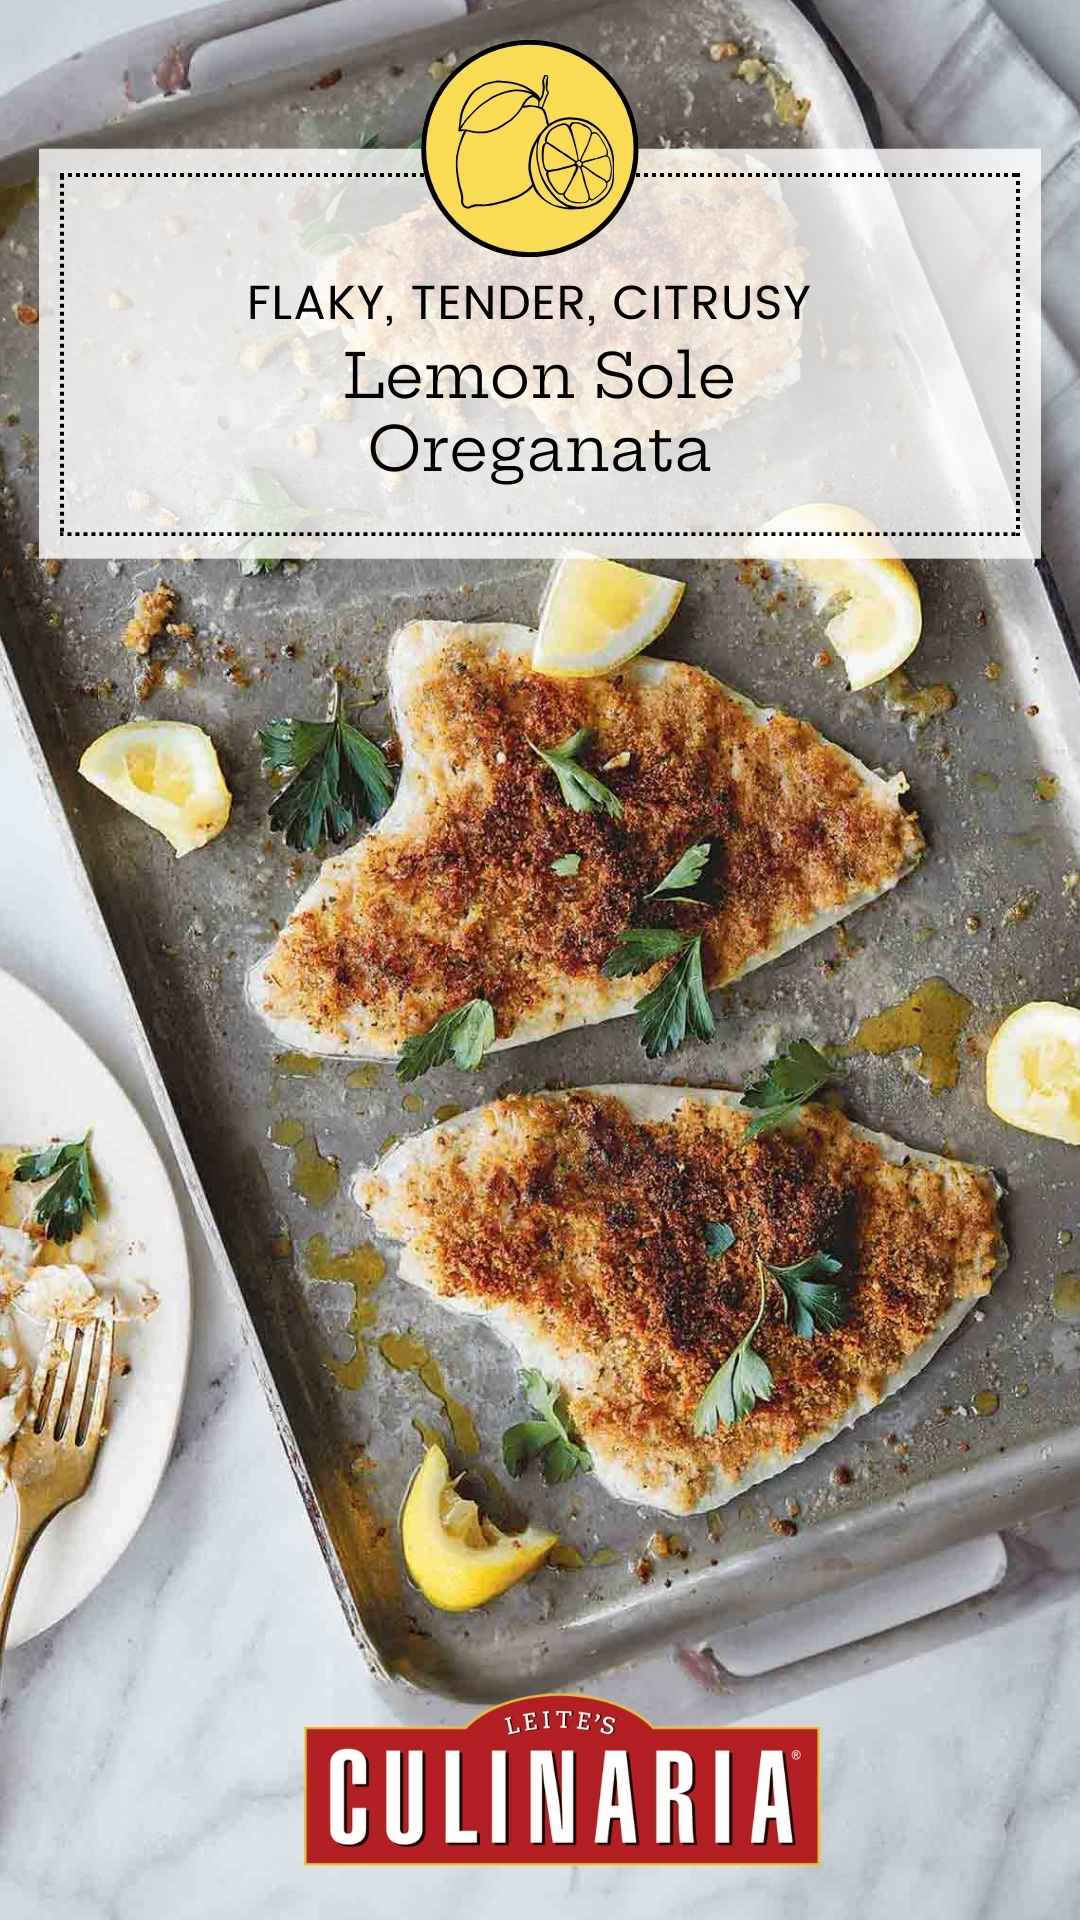 Three pieces of baked sole with bread crumbs and lemon on a rimmed baking sheet.